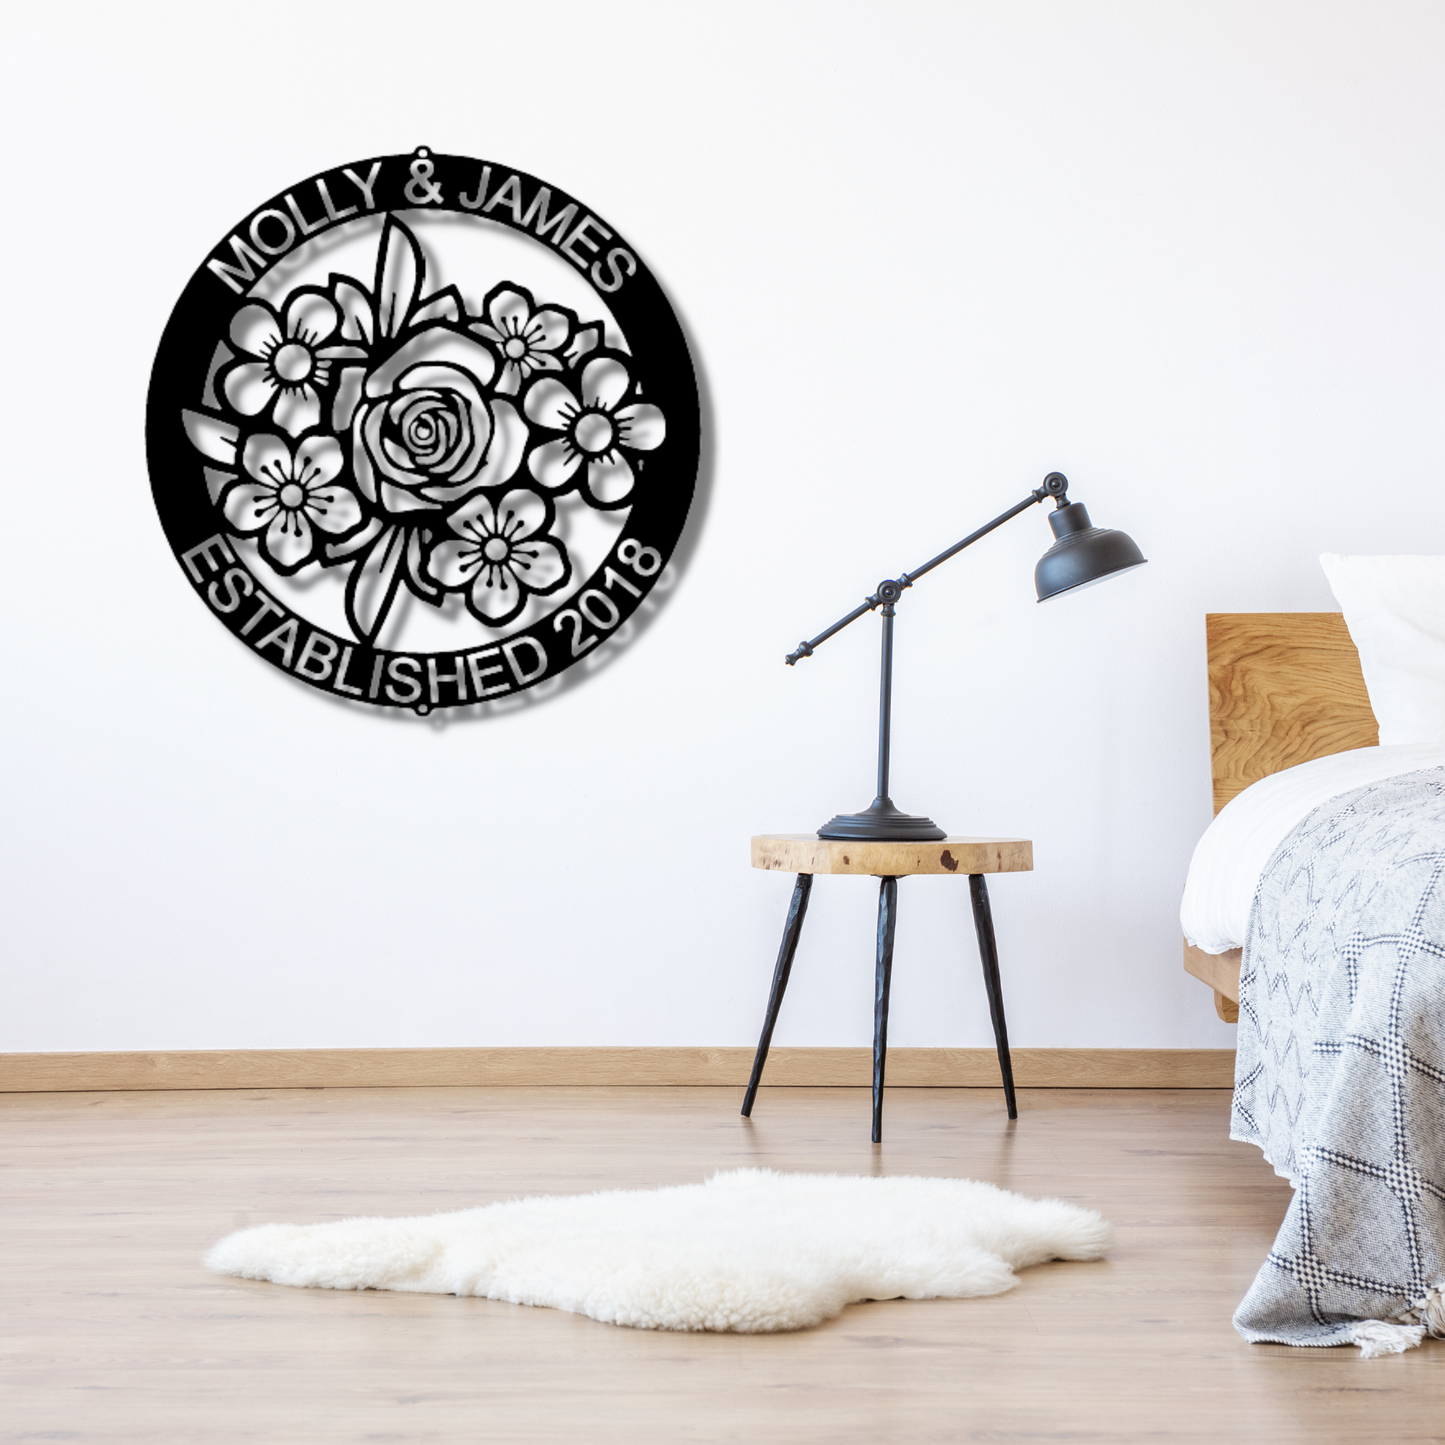 Floral Ring Monogram - Steel Sign, Ring Monogram, Wedding Gifts For Couple, Dining Room Wall Decor, Wall Signs For Living Room